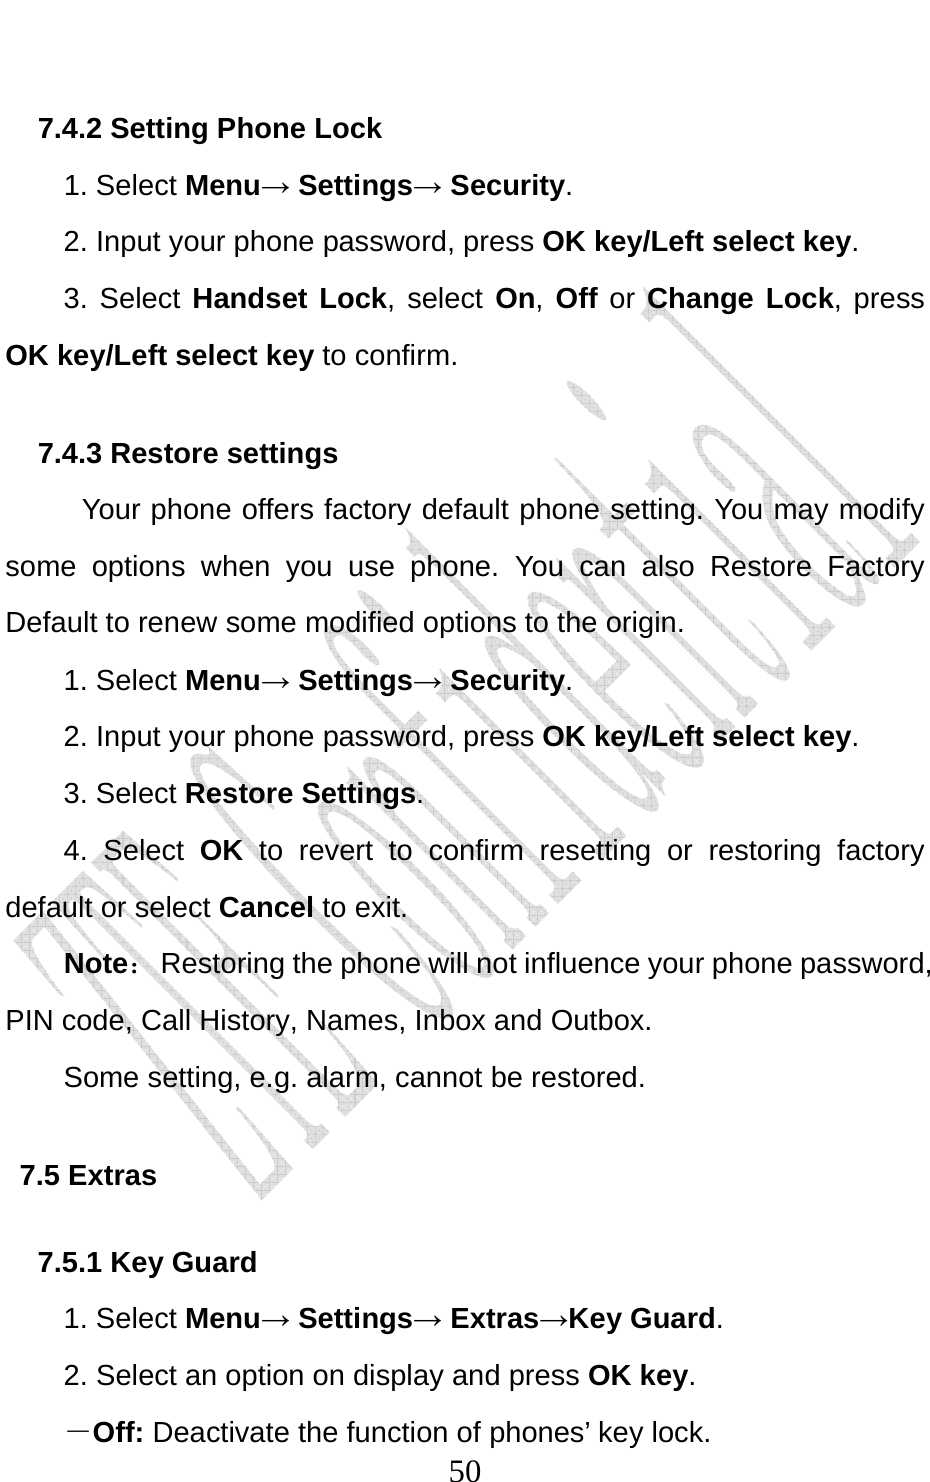                              507.4.2 Setting Phone Lock   1. Select Menu→ Settings→ Security. 2. Input your phone password, press OK key/Left select key. 3. Select Handset Lock, select On, Off or Change Lock, press OK key/Left select key to confirm. 7.4.3 Restore settings Your phone offers factory default phone setting. You may modify some options when you use phone. You can also Restore Factory Default to renew some modified options to the origin.   1. Select Menu→ Settings→ Security. 2. Input your phone password, press OK key/Left select key. 3. Select Restore Settings. 4. Select OK to revert to confirm resetting or restoring factory default or select Cancel to exit. Note：  Restoring the phone will not influence your phone password, PIN code, Call History, Names, Inbox and Outbox.   Some setting, e.g. alarm, cannot be restored. 7.5 Extras 7.5.1 Key Guard 1. Select Menu→ Settings→ Extras→Key Guard. 2. Select an option on display and press OK key. －Off: Deactivate the function of phones’ key lock. 